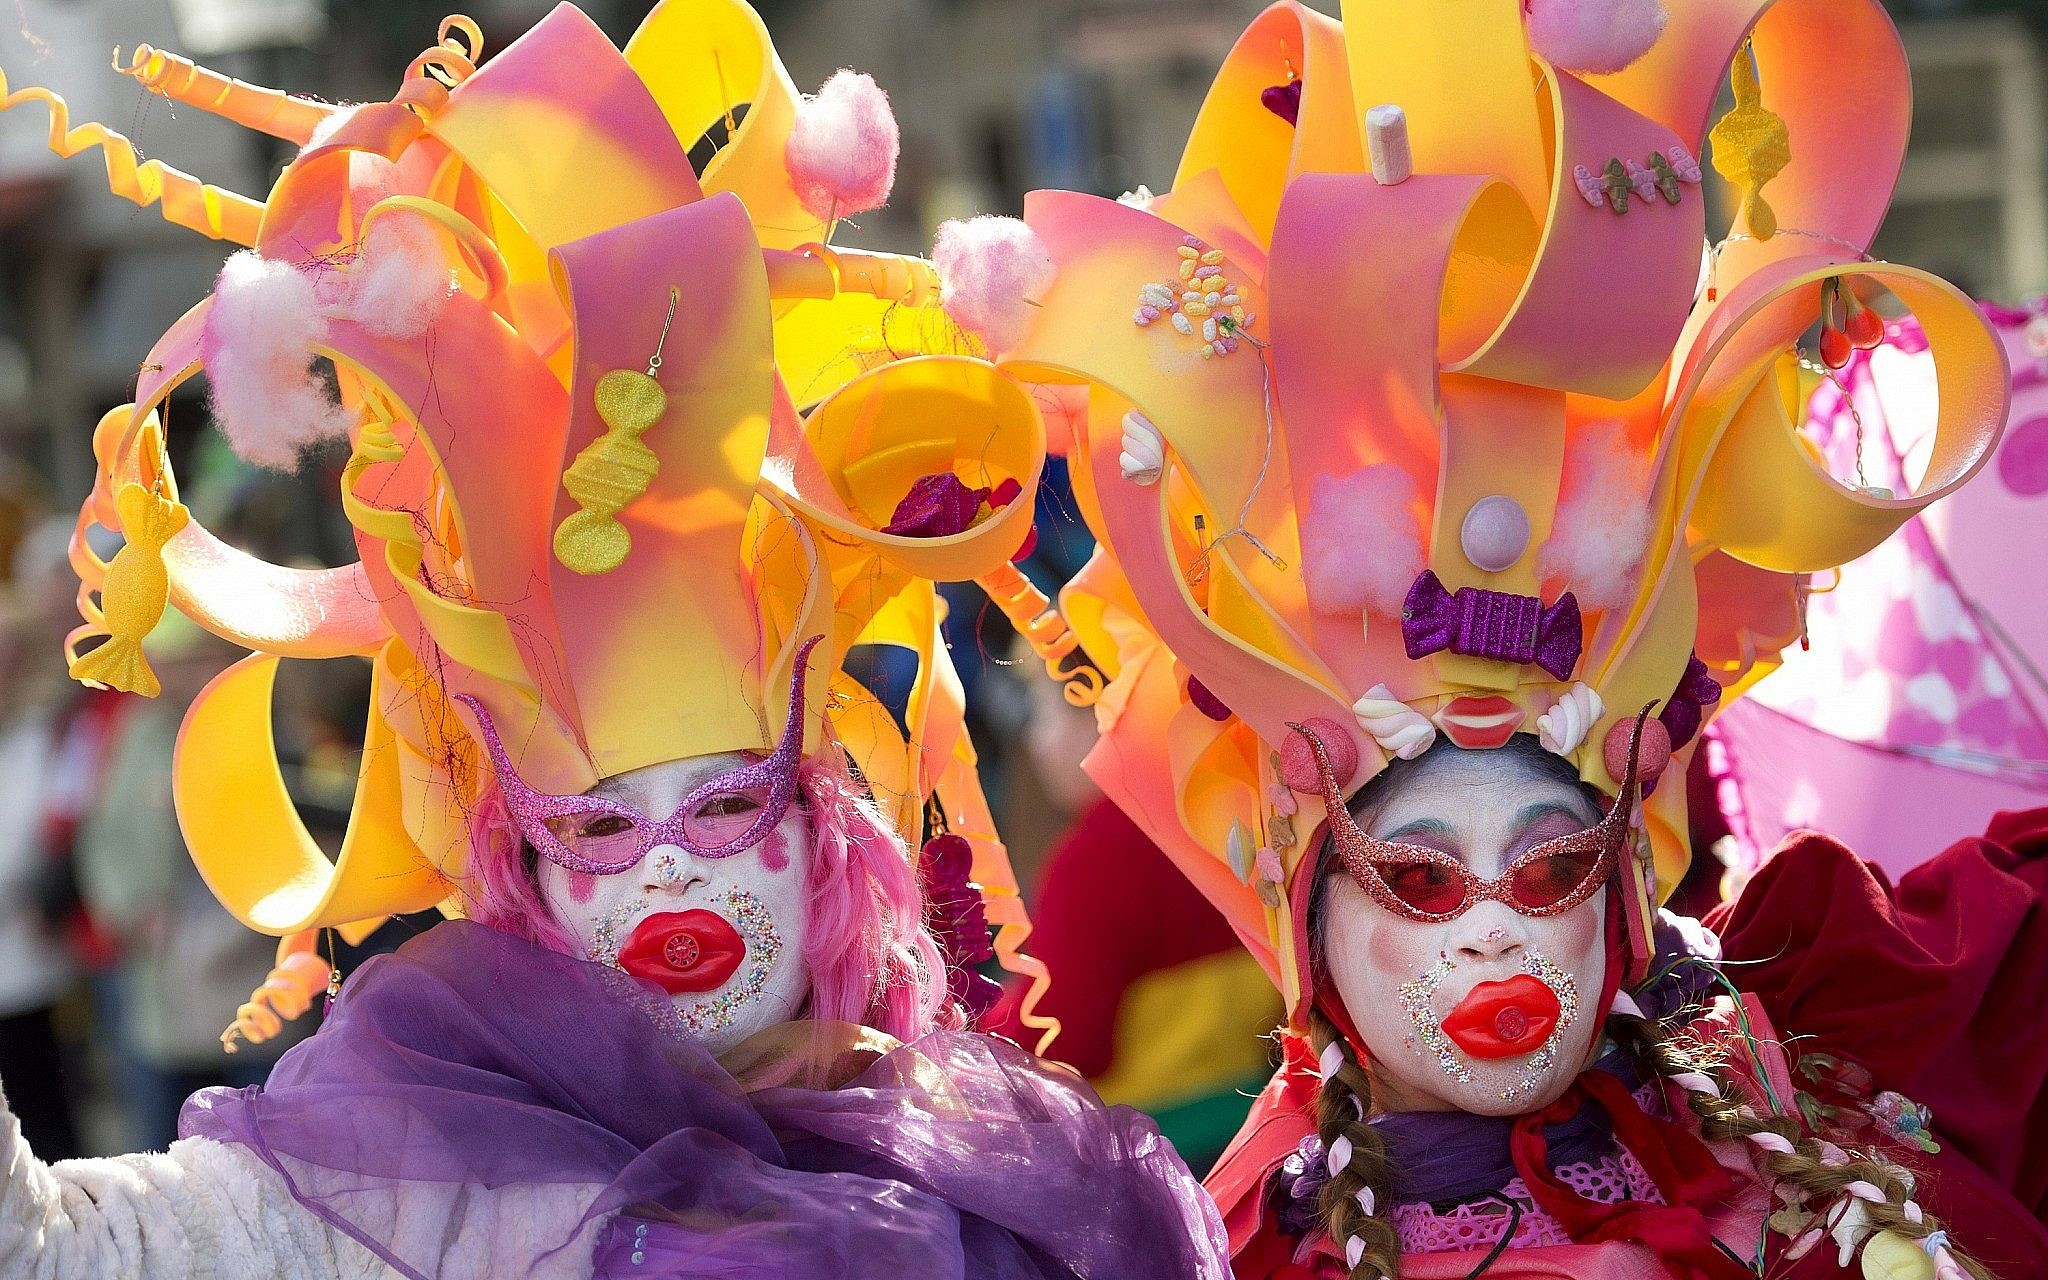 For Jews in the Netherlands, Catholic Carnival feels like 'hardcore The Times Israel